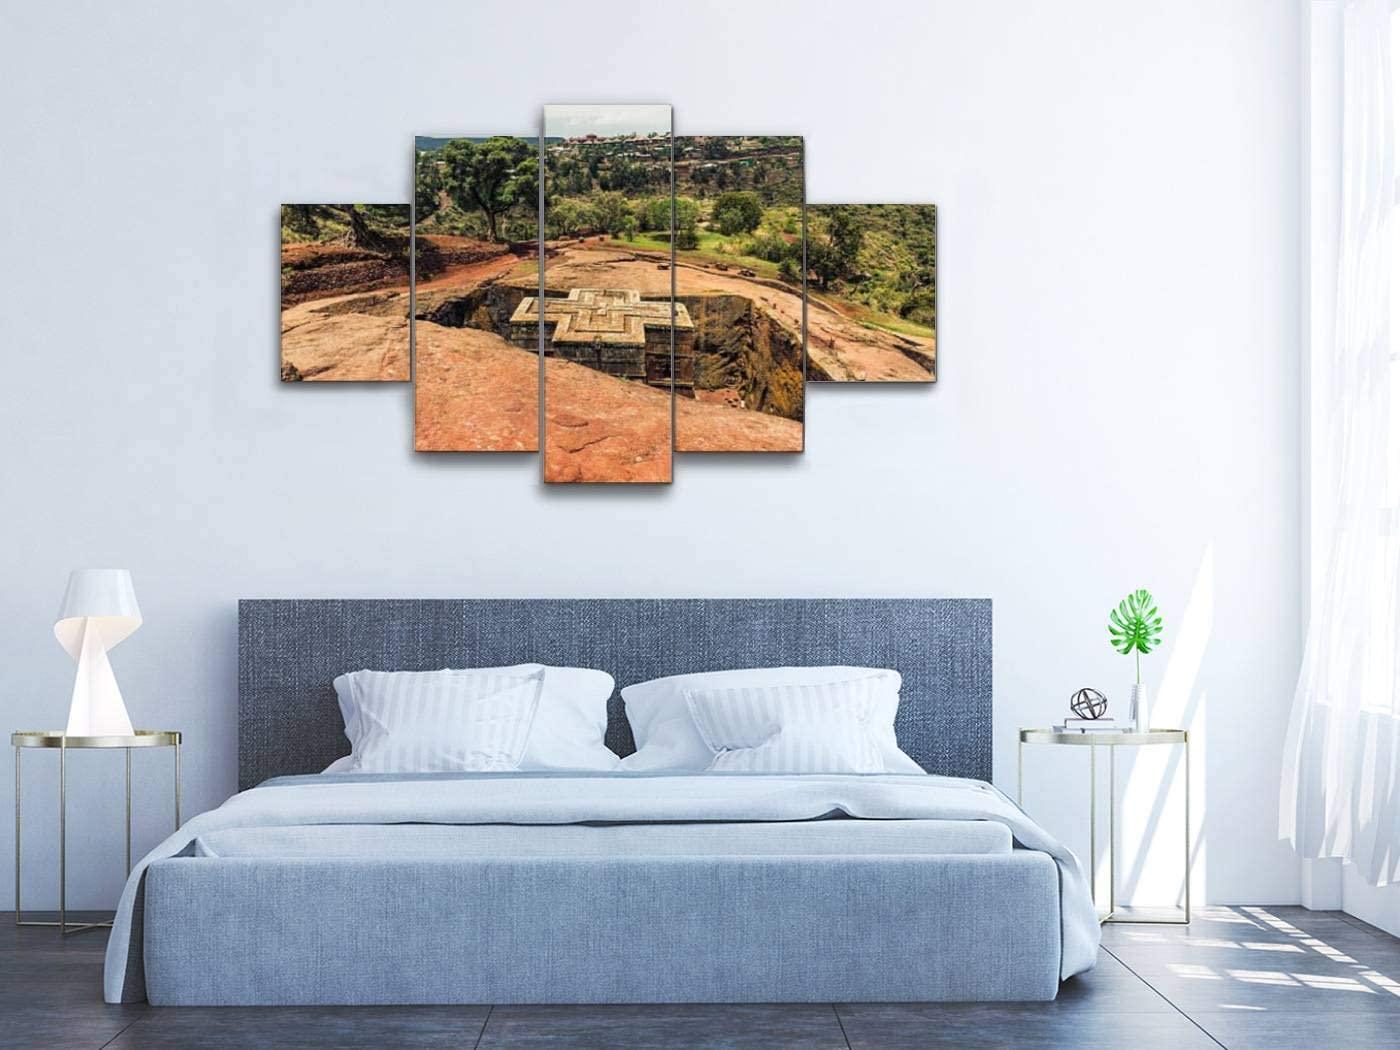 Canvas Art Wall St George Church in Lalibela Ethiopia Paintings Vintage Prints Home Decor Artworks Gift Ready to Hang for Living Room 5 Panels Large Size